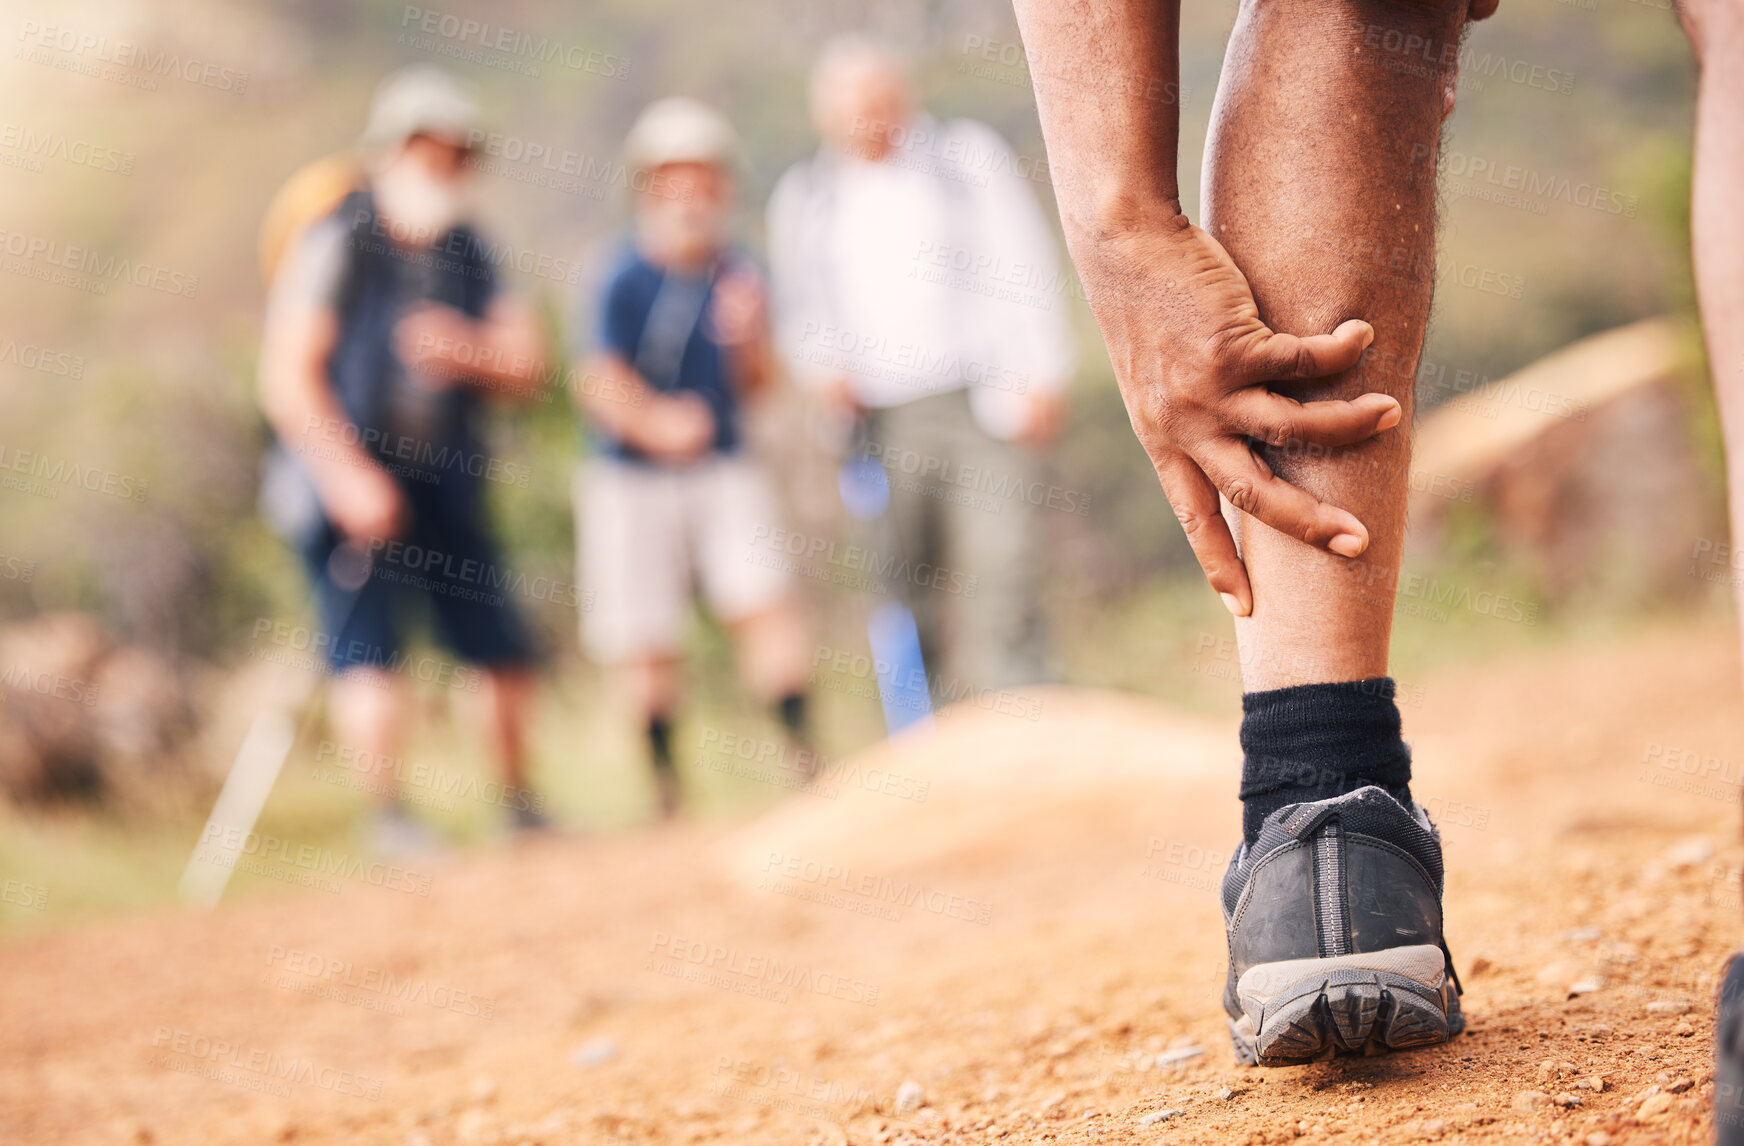 Buy stock photo Injury, leg pain and hands of senior black man after hiking or sports accident outdoors. Training hike, elderly and male with fibromyalgia, inflammation or arthritis, broken bones or painful muscles.